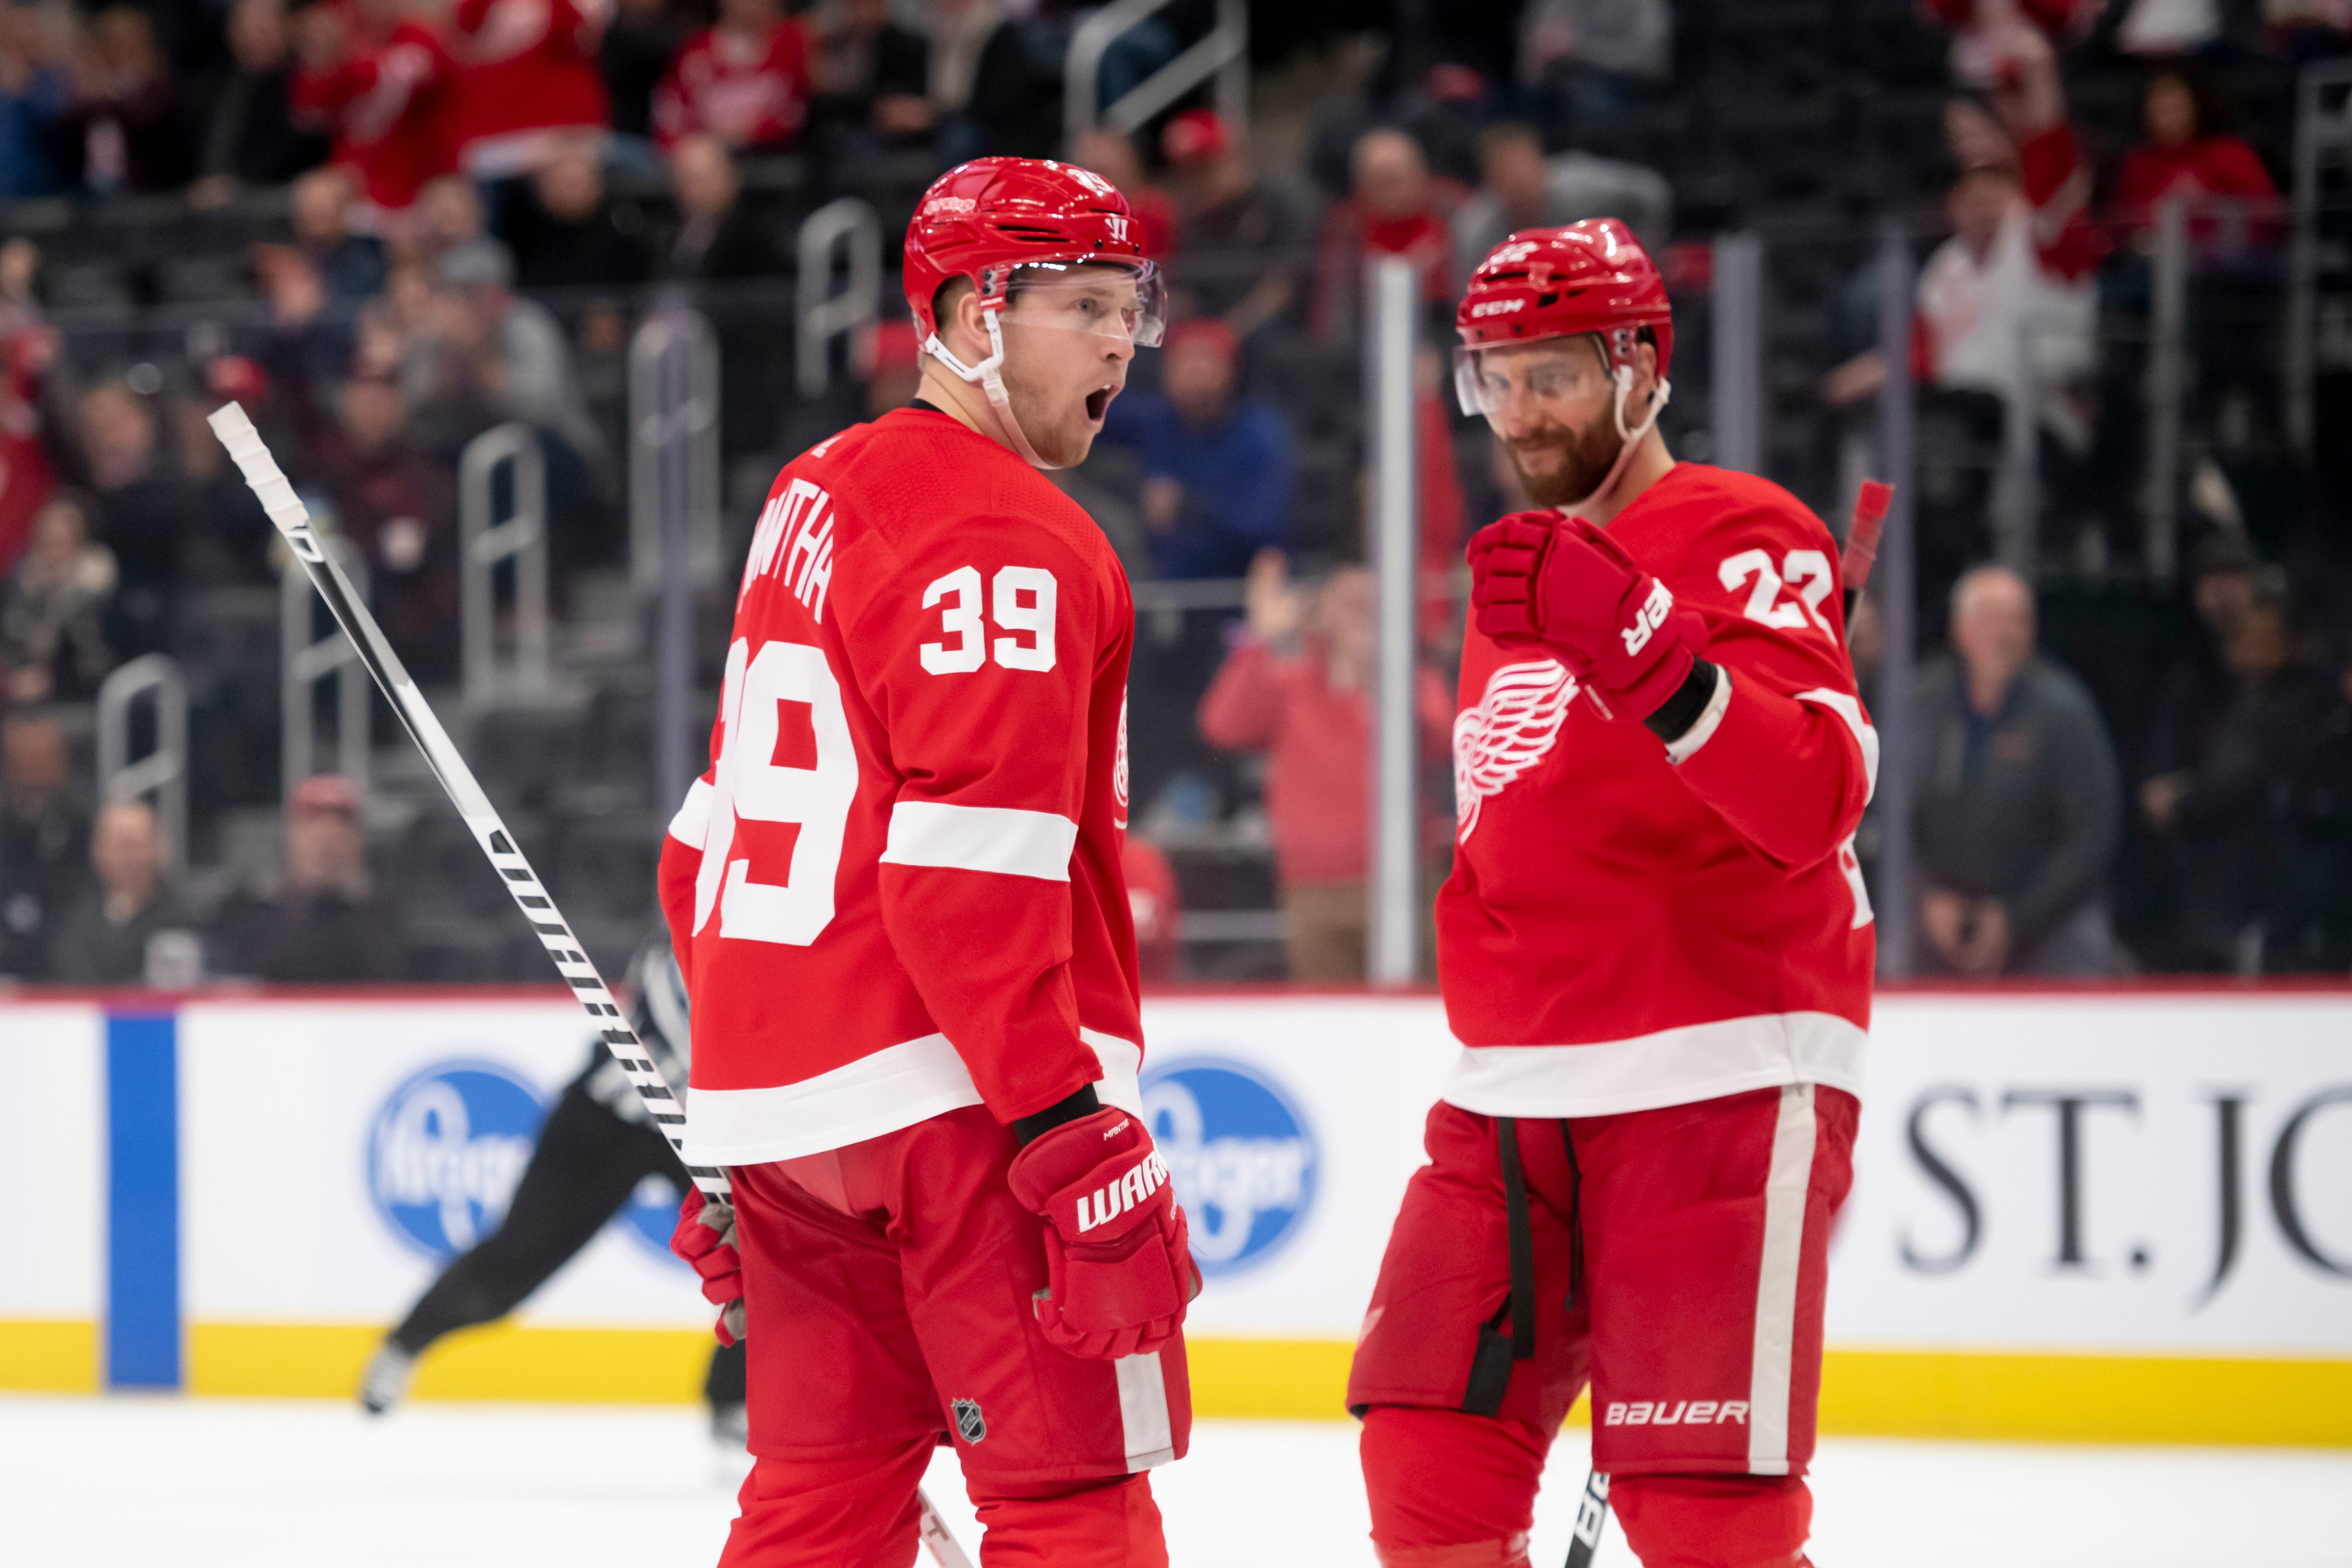 Anthony Mantha – AGE: 25. CONTRACT: Restricted free agent. STATS: 43 games, 16 goals, 22 assists. COMMENT: Two significant injuries cut into Mantha’s season but he still showed enough to warrant being a big piece of the future. When Mantha is on his game, few can match his combination of size and skill set. GRADE: B-plus.